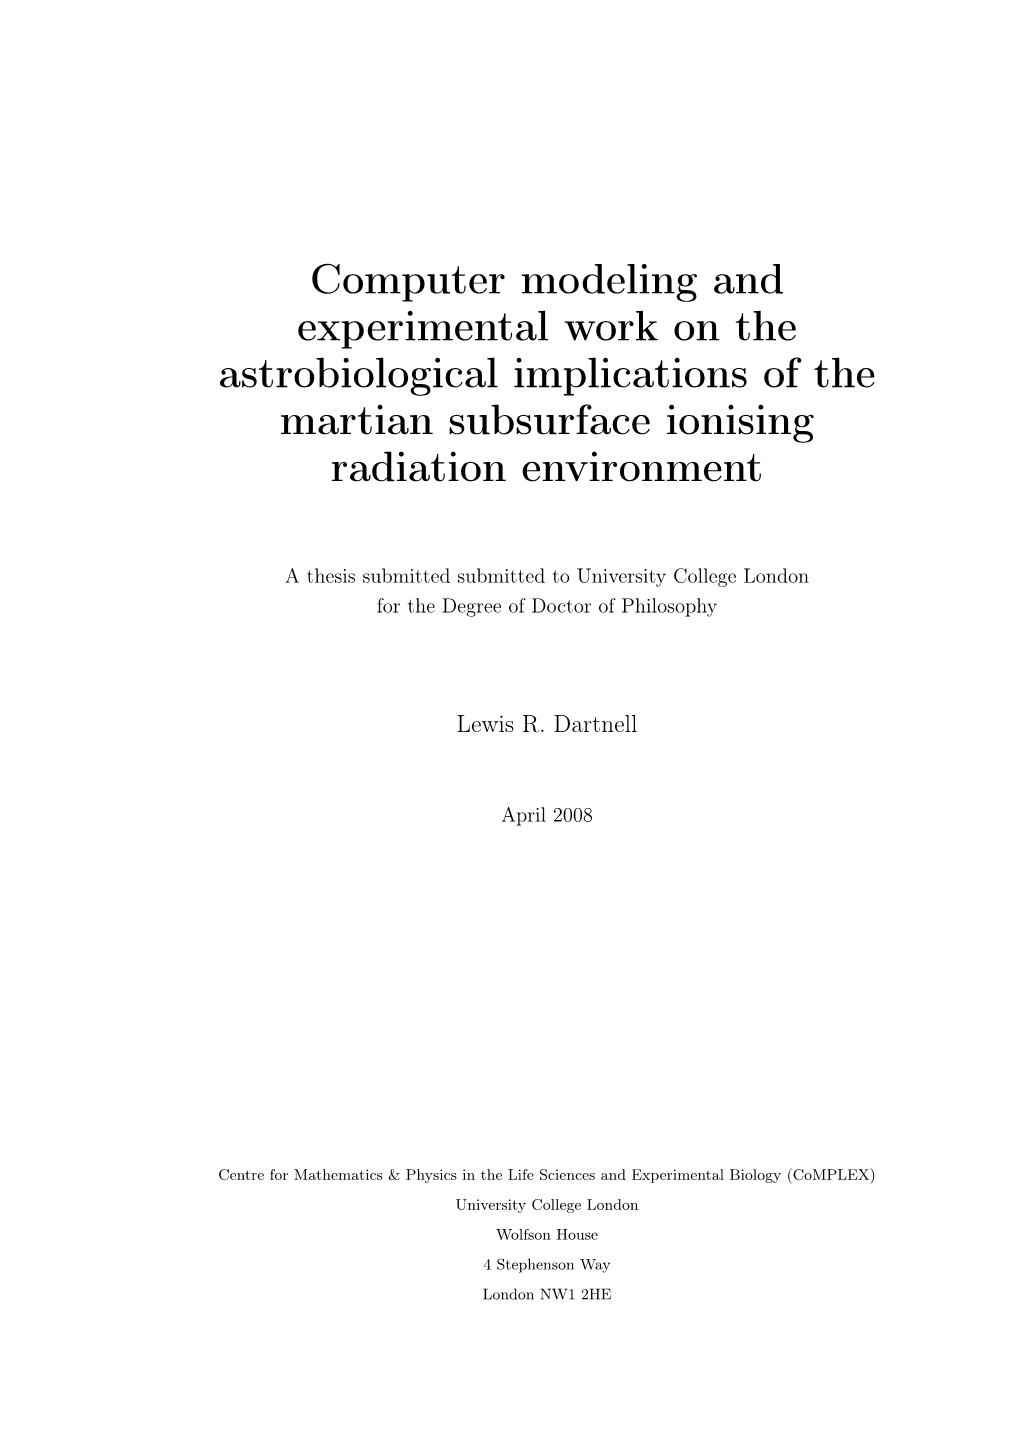 Computer Modeling and Experimental Work on the Astrobiological Implications of the Martian Subsurface Ionising Radiation Environment